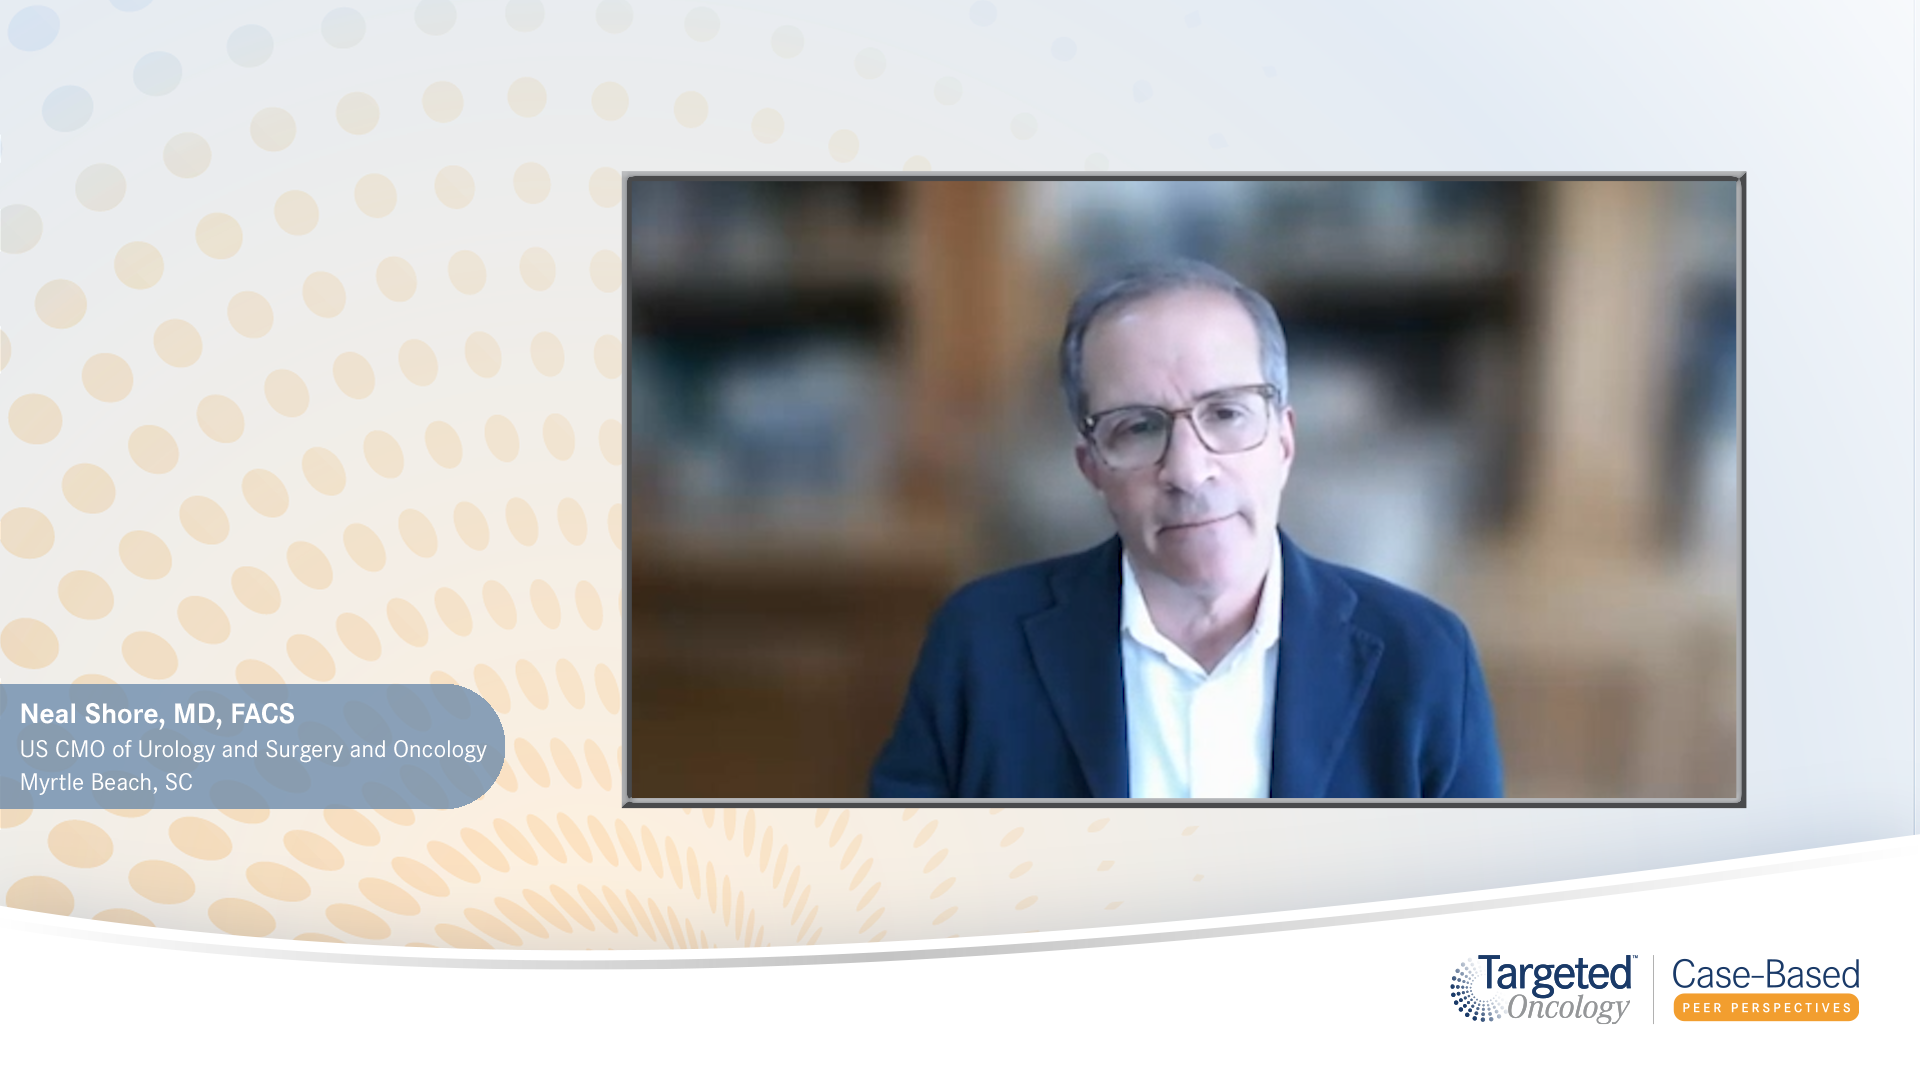 Video 3 - "Optimizing Treatment, Biomarkers, and Chemotherapy for Patients with nmCRPC"